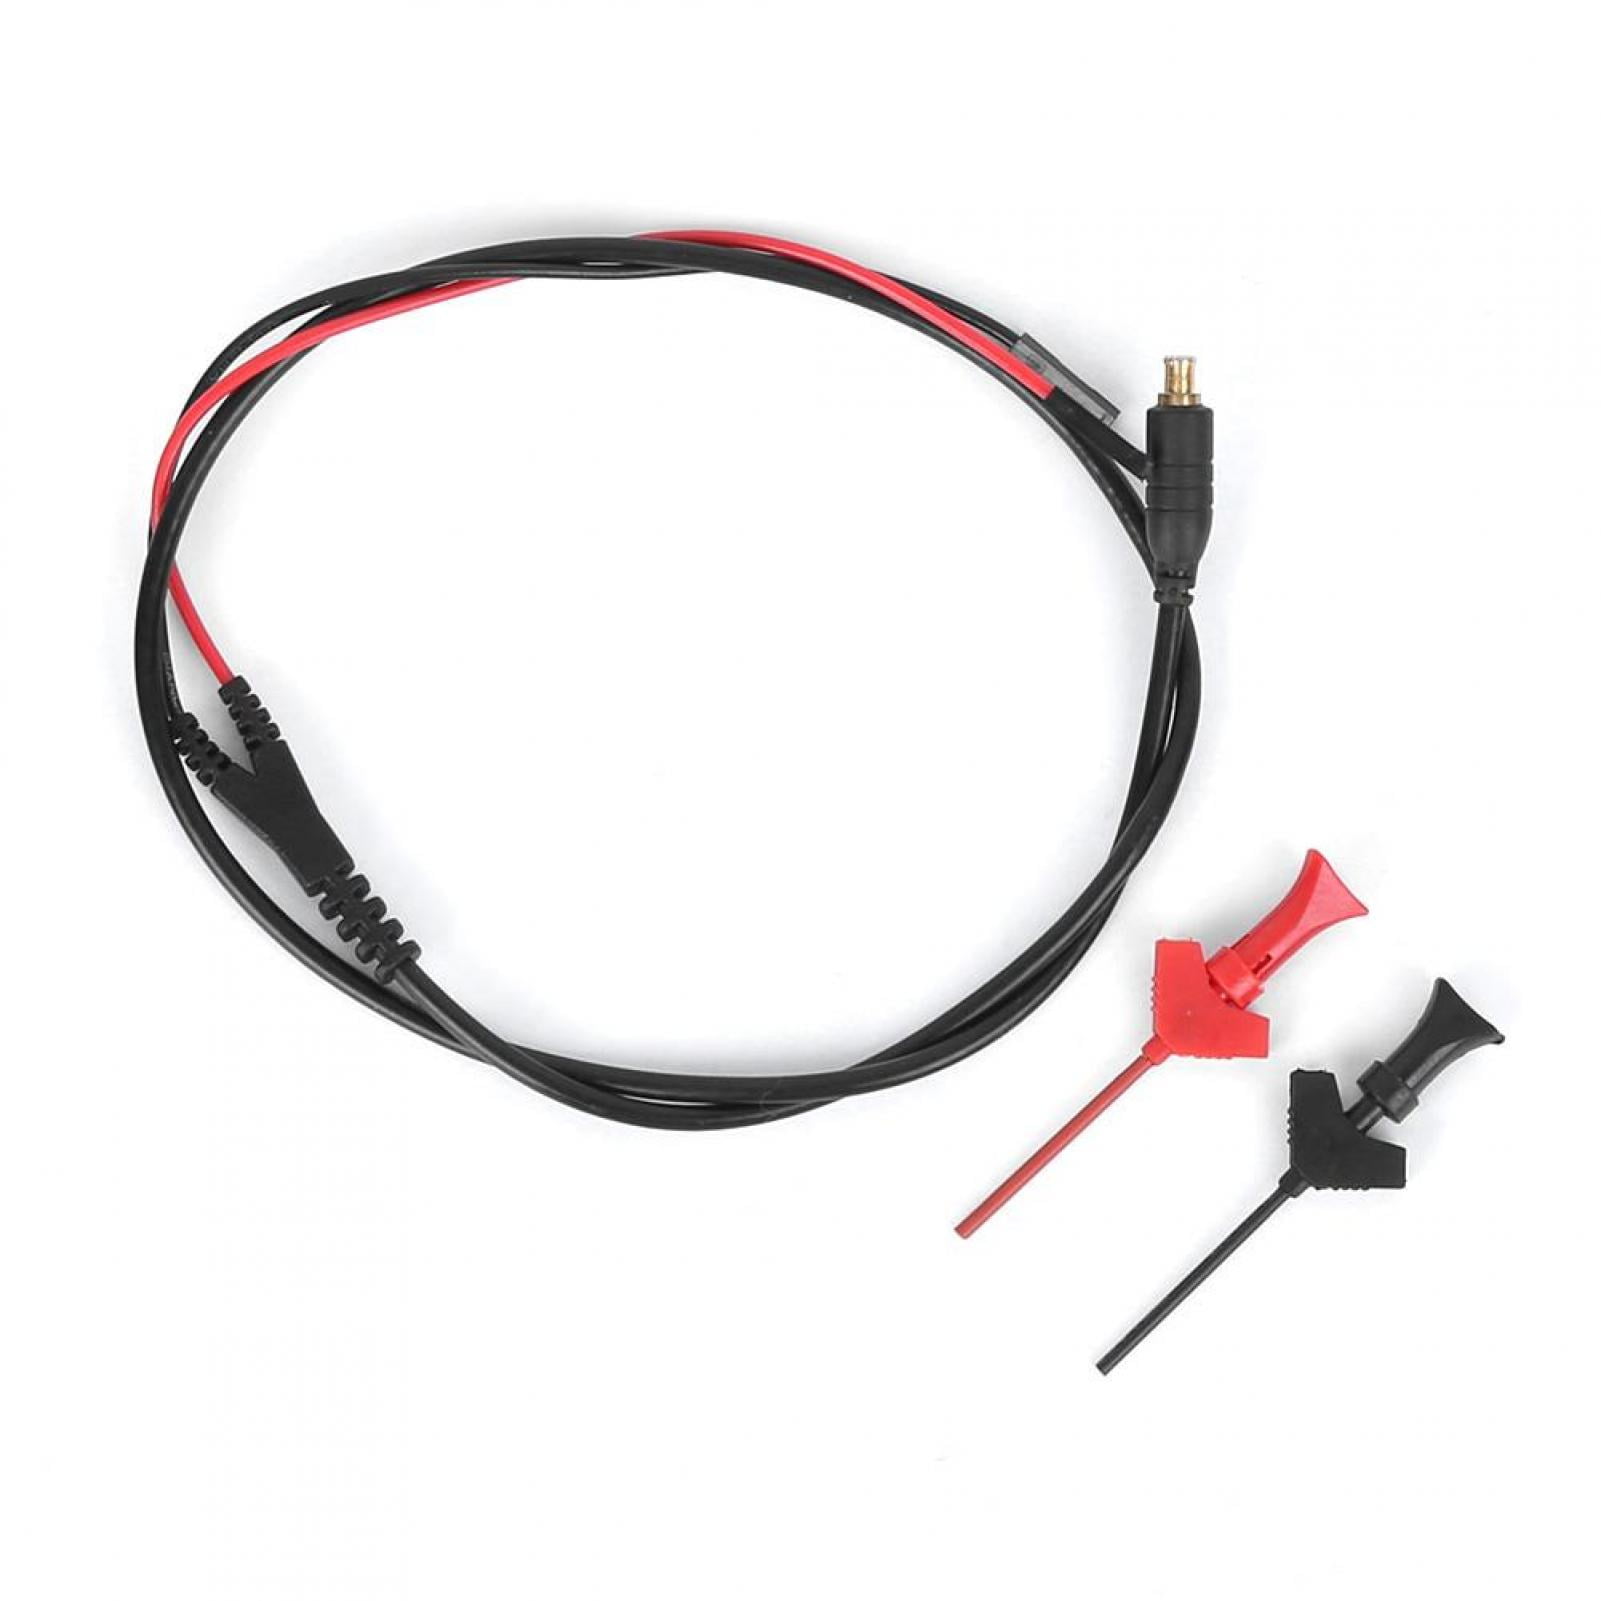 Accurancy Connector Cable Test Hook Good Protection Performance Test Cable for Oscilloscopes for Oscilloscopes 